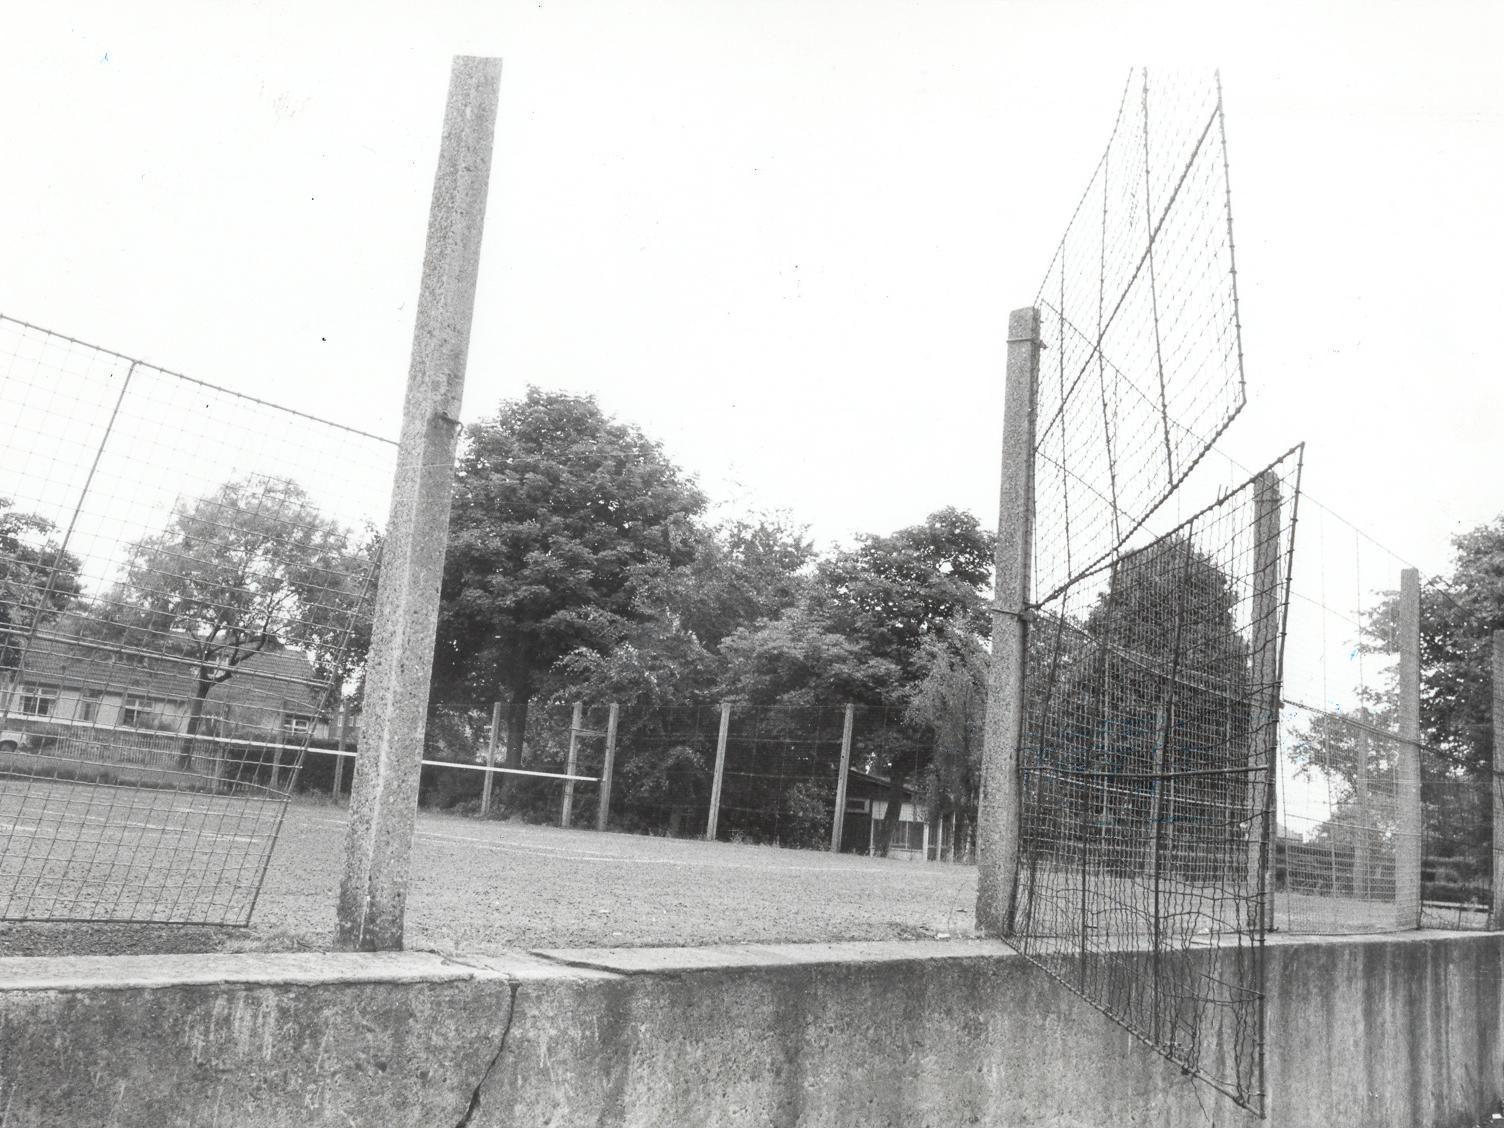 Even if it was possible to play on the Woodhouse Moor tennis courts, players would have to spend most of their time retrieving balls through the torn-down fences.